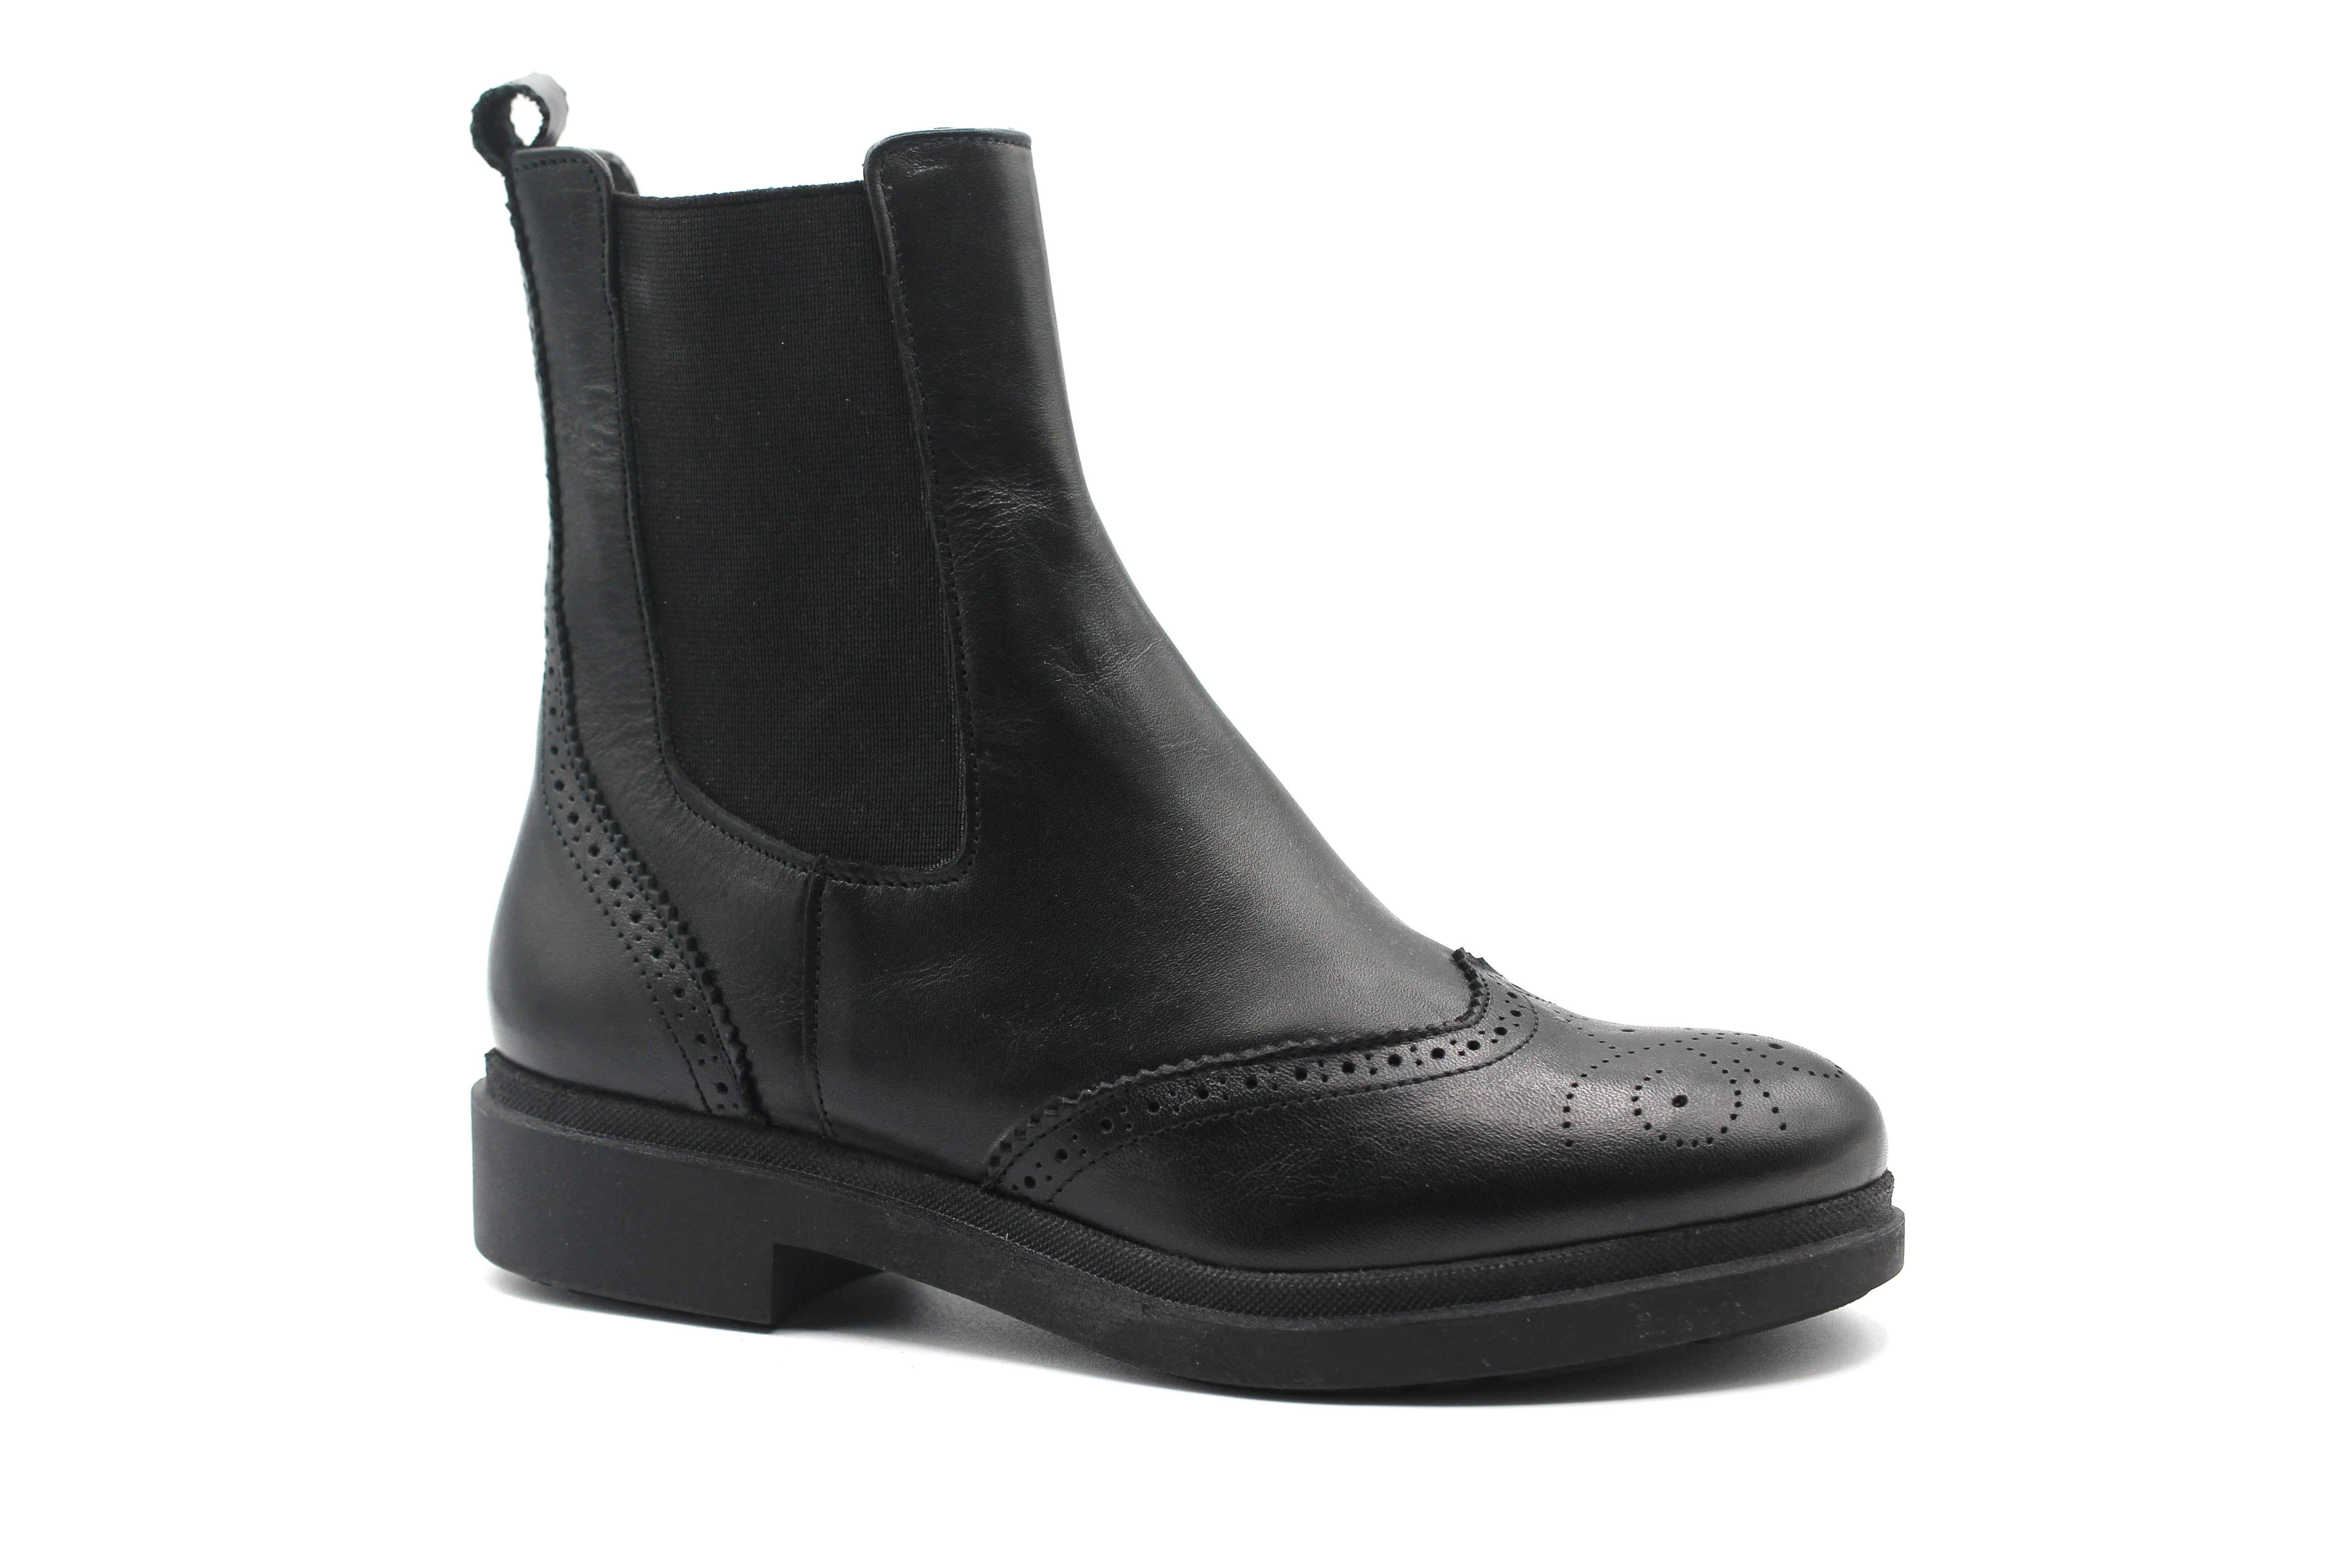 Valencia Black Leather Bootie with Elastic Sides